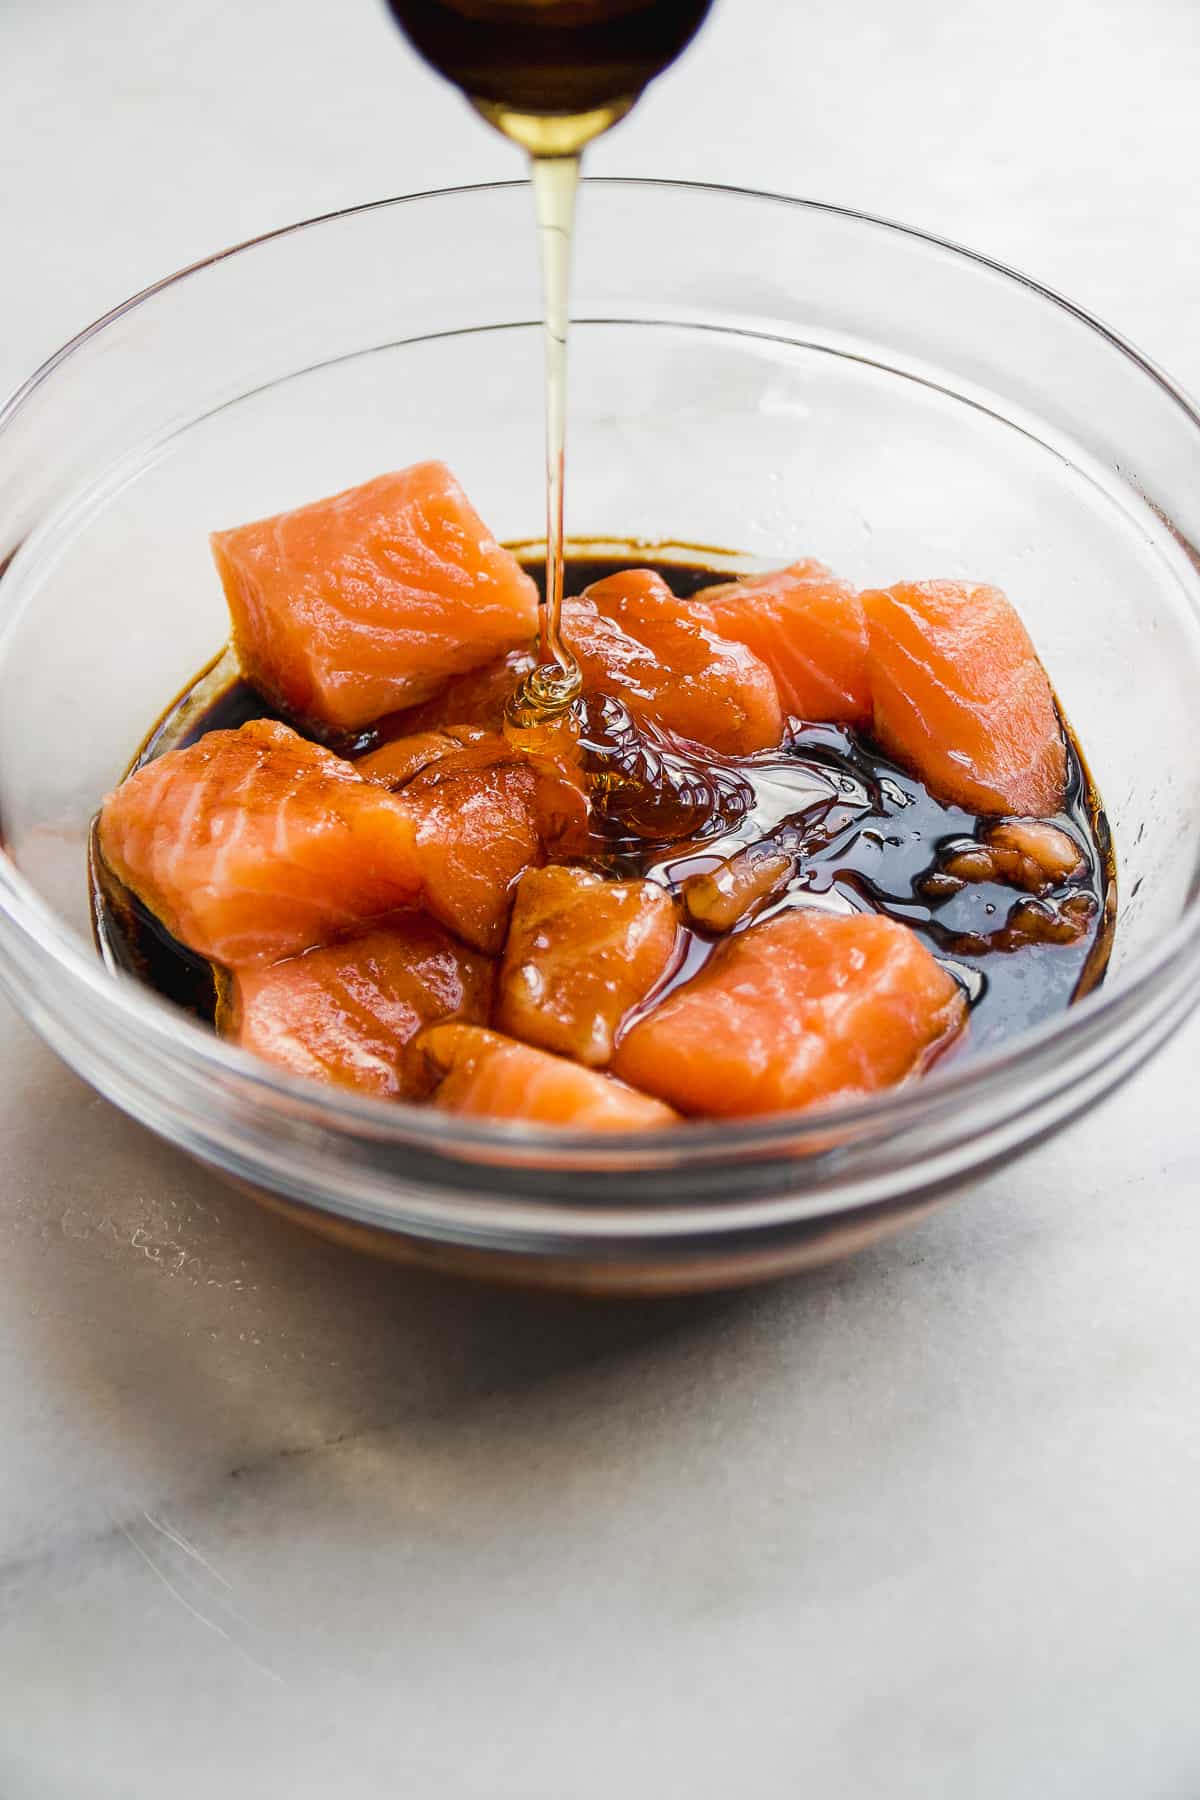 Honey being poured into a bowl with salmon cubes and teriyaki sauce.